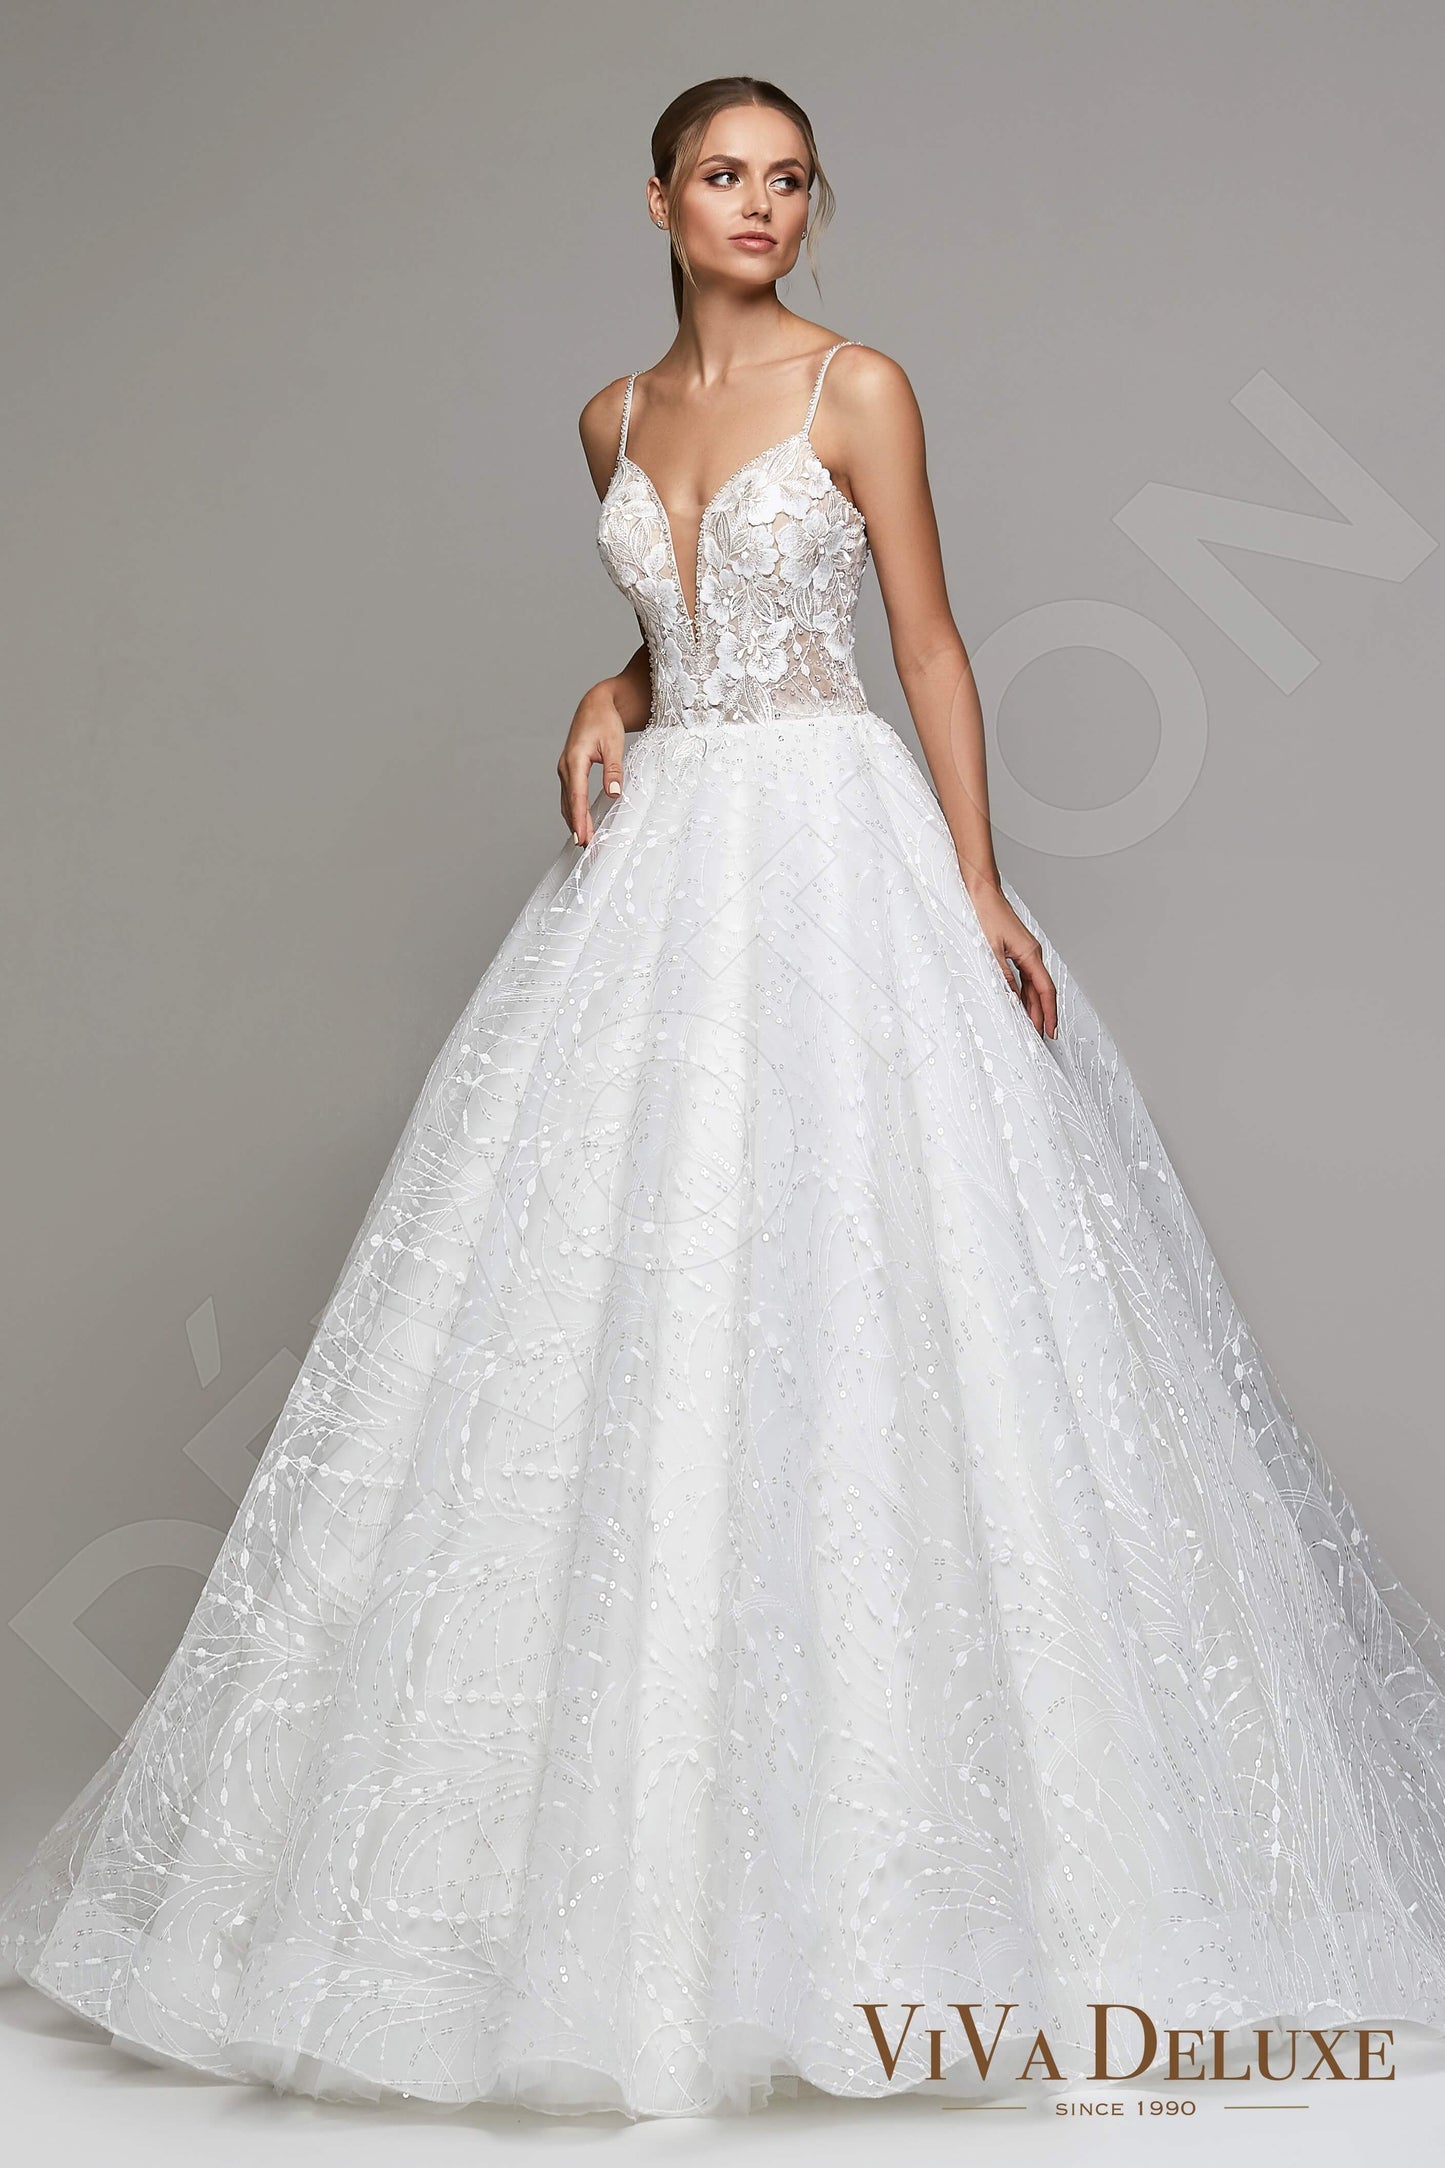 Glorie Open back Princess/Ball Gown Straps Wedding Dress Front